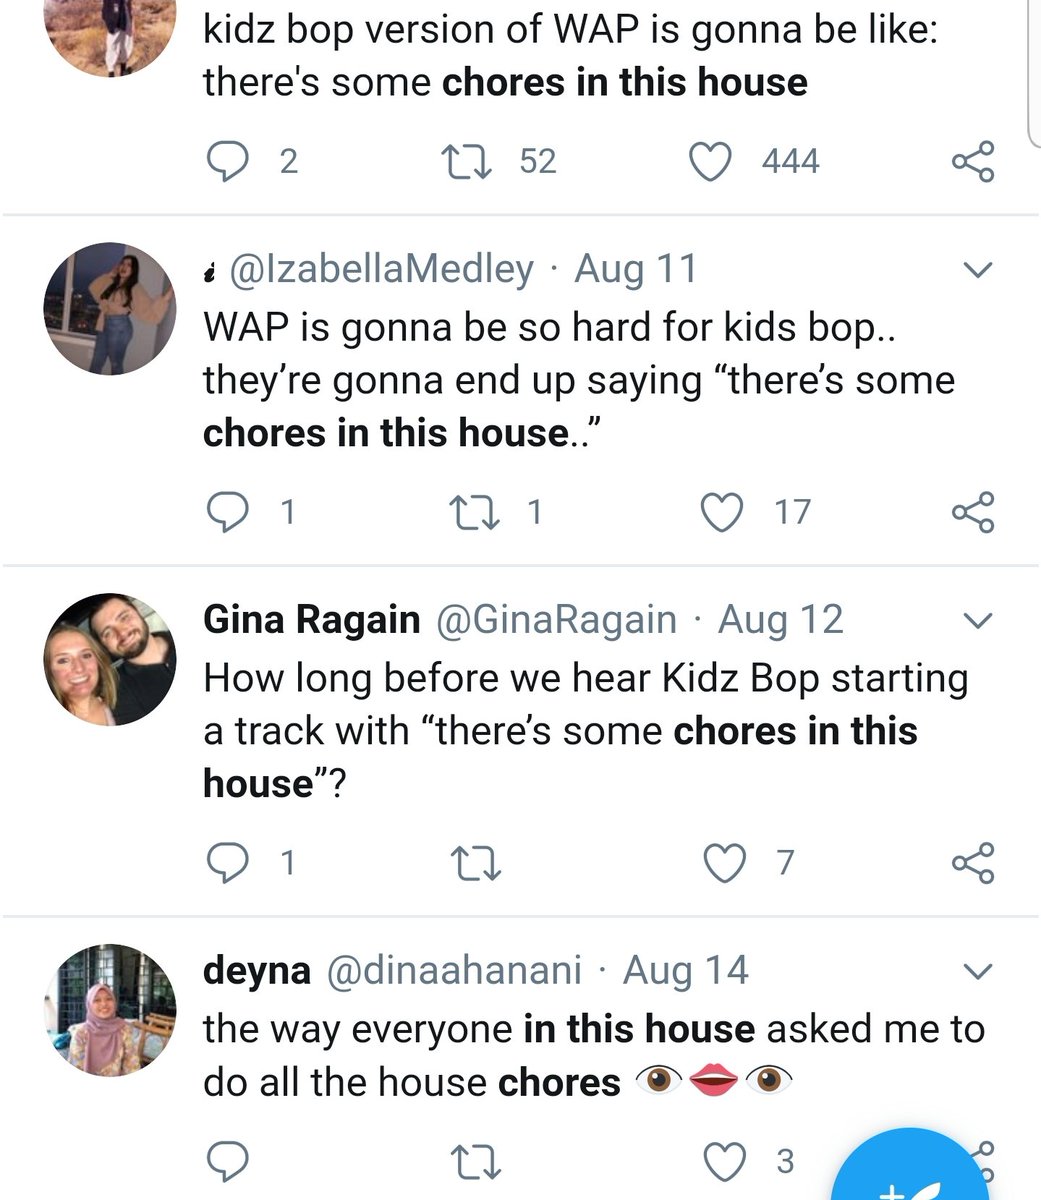 Sophie Jansen Kidz Bop Version Of Wap Is Gonna Be Like There S Some Chores In This House Twitter